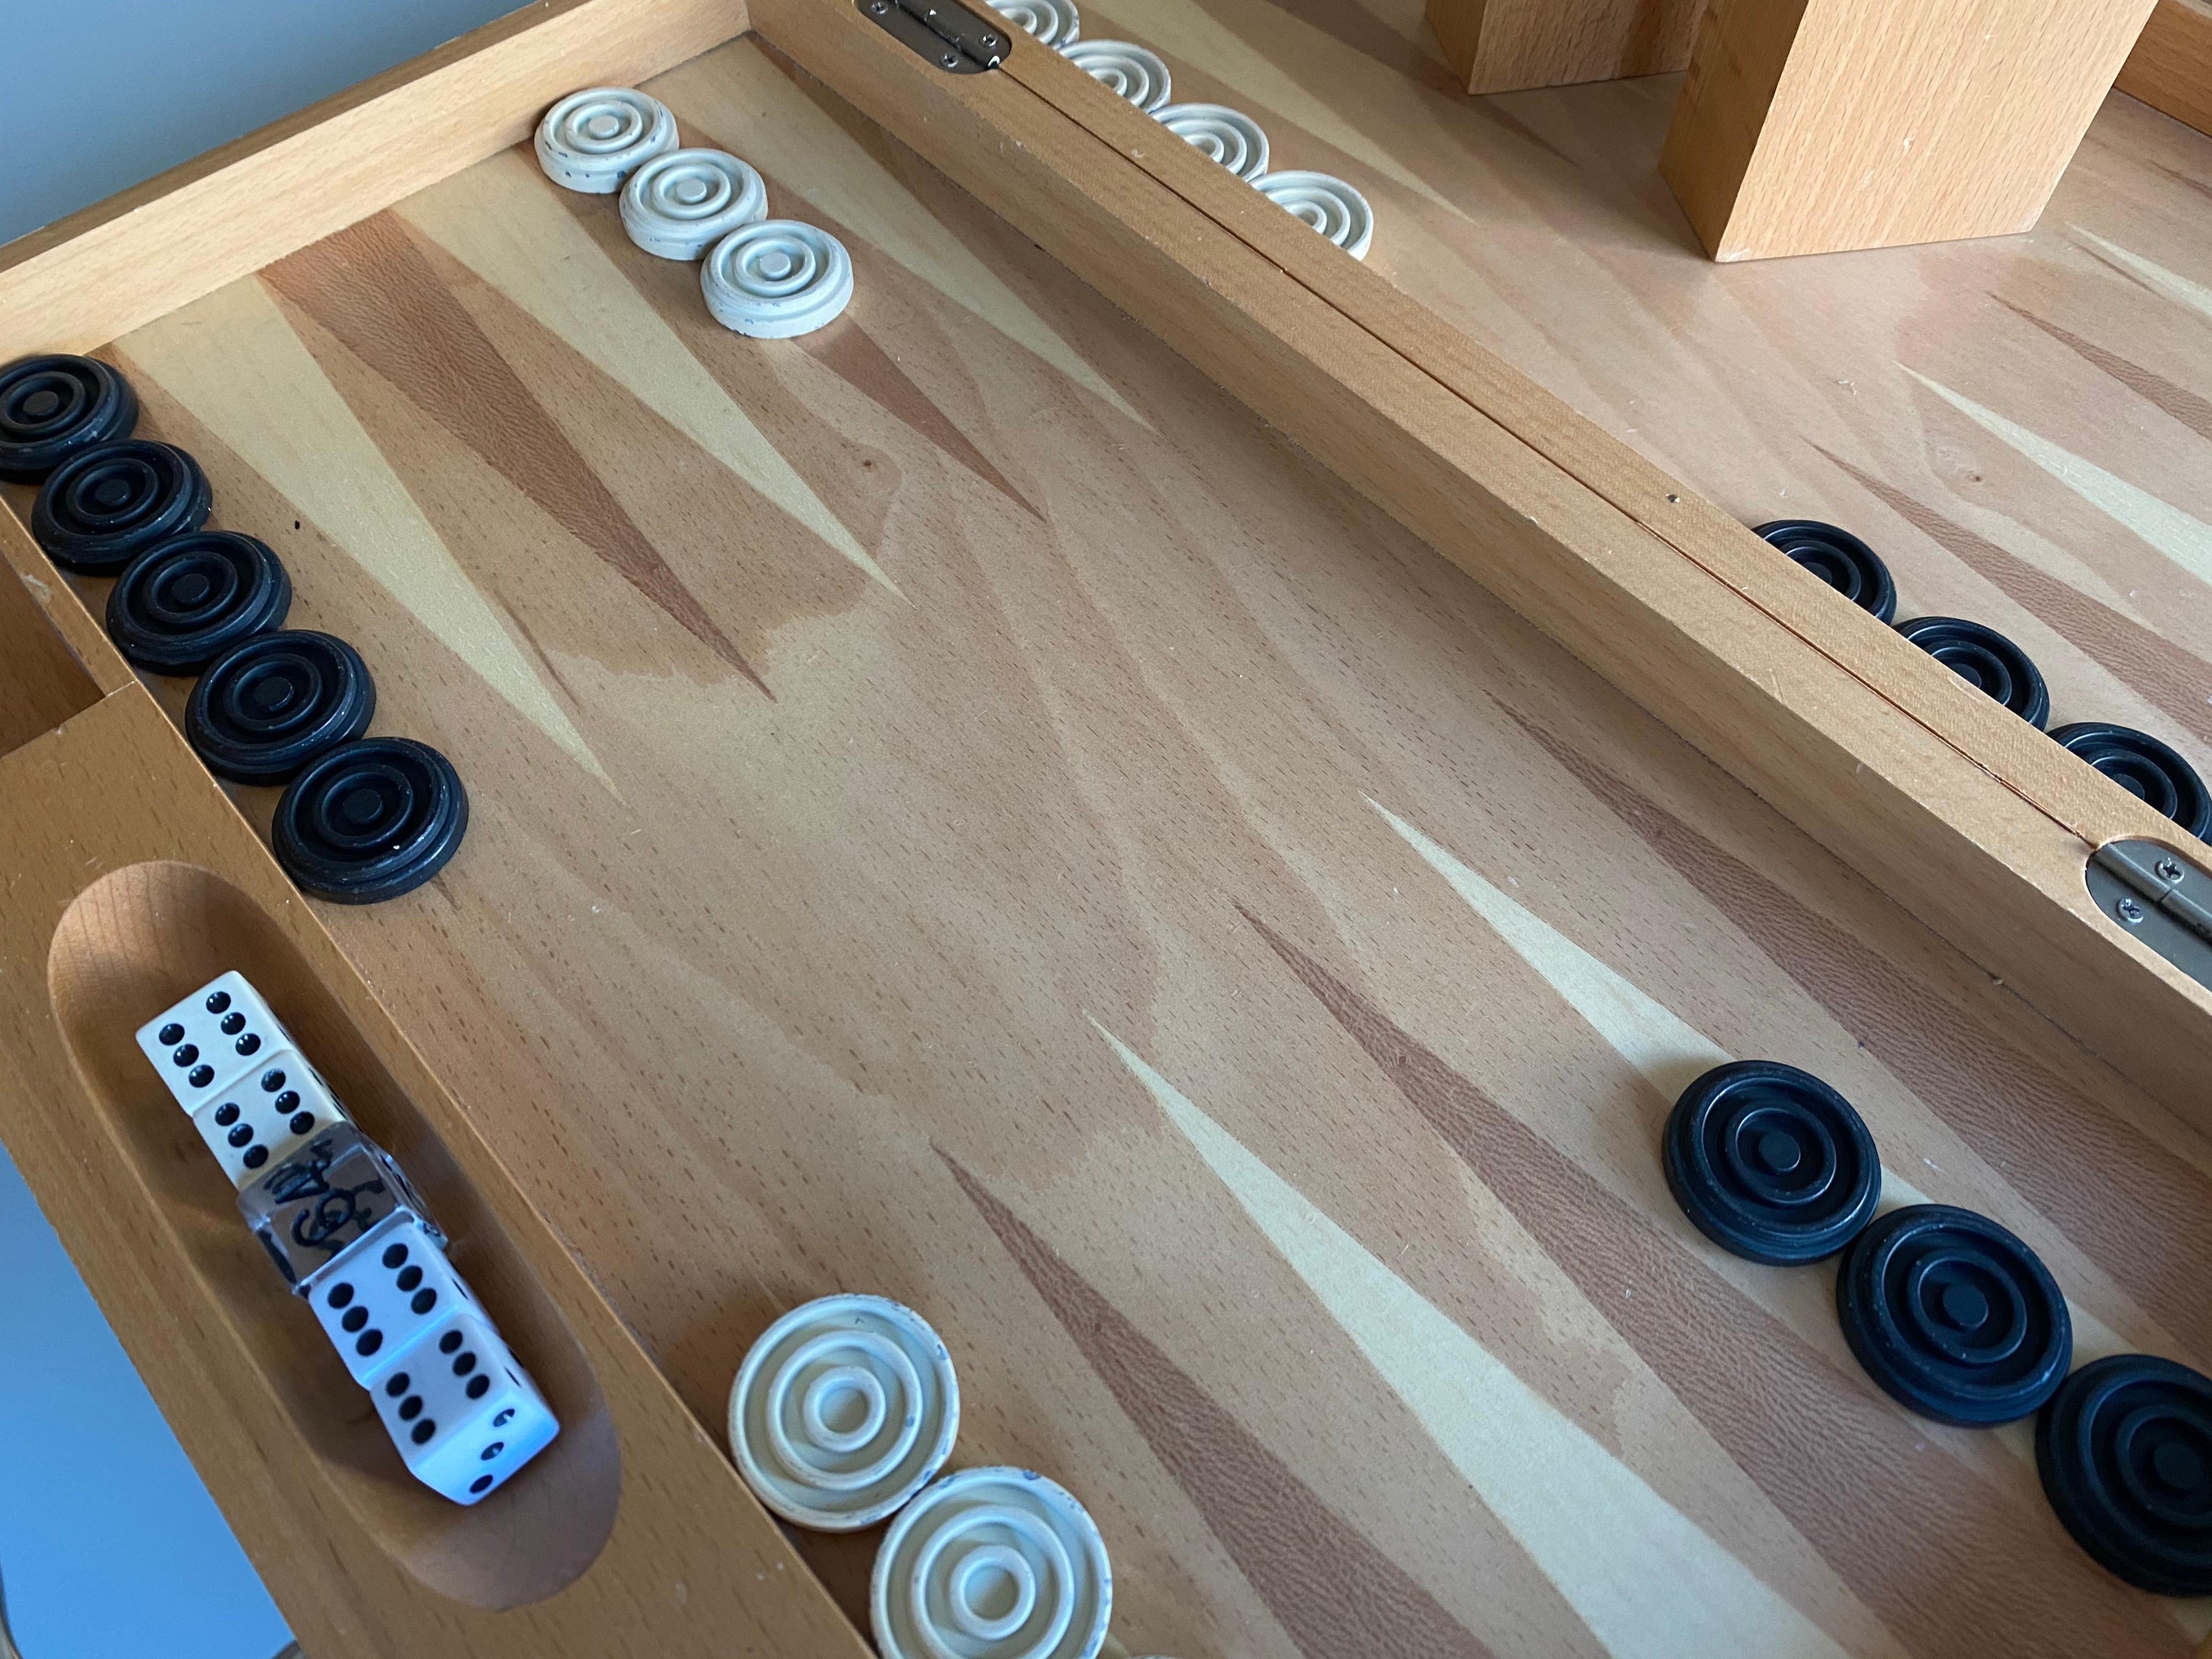 A Michael Graves designed backgammon board in light beech wood.

Set includes thirty heavy cast metal pieces in cream and black, two pair of dice, doubling cube, and dice cups in matching wood.

Case measures 17.25